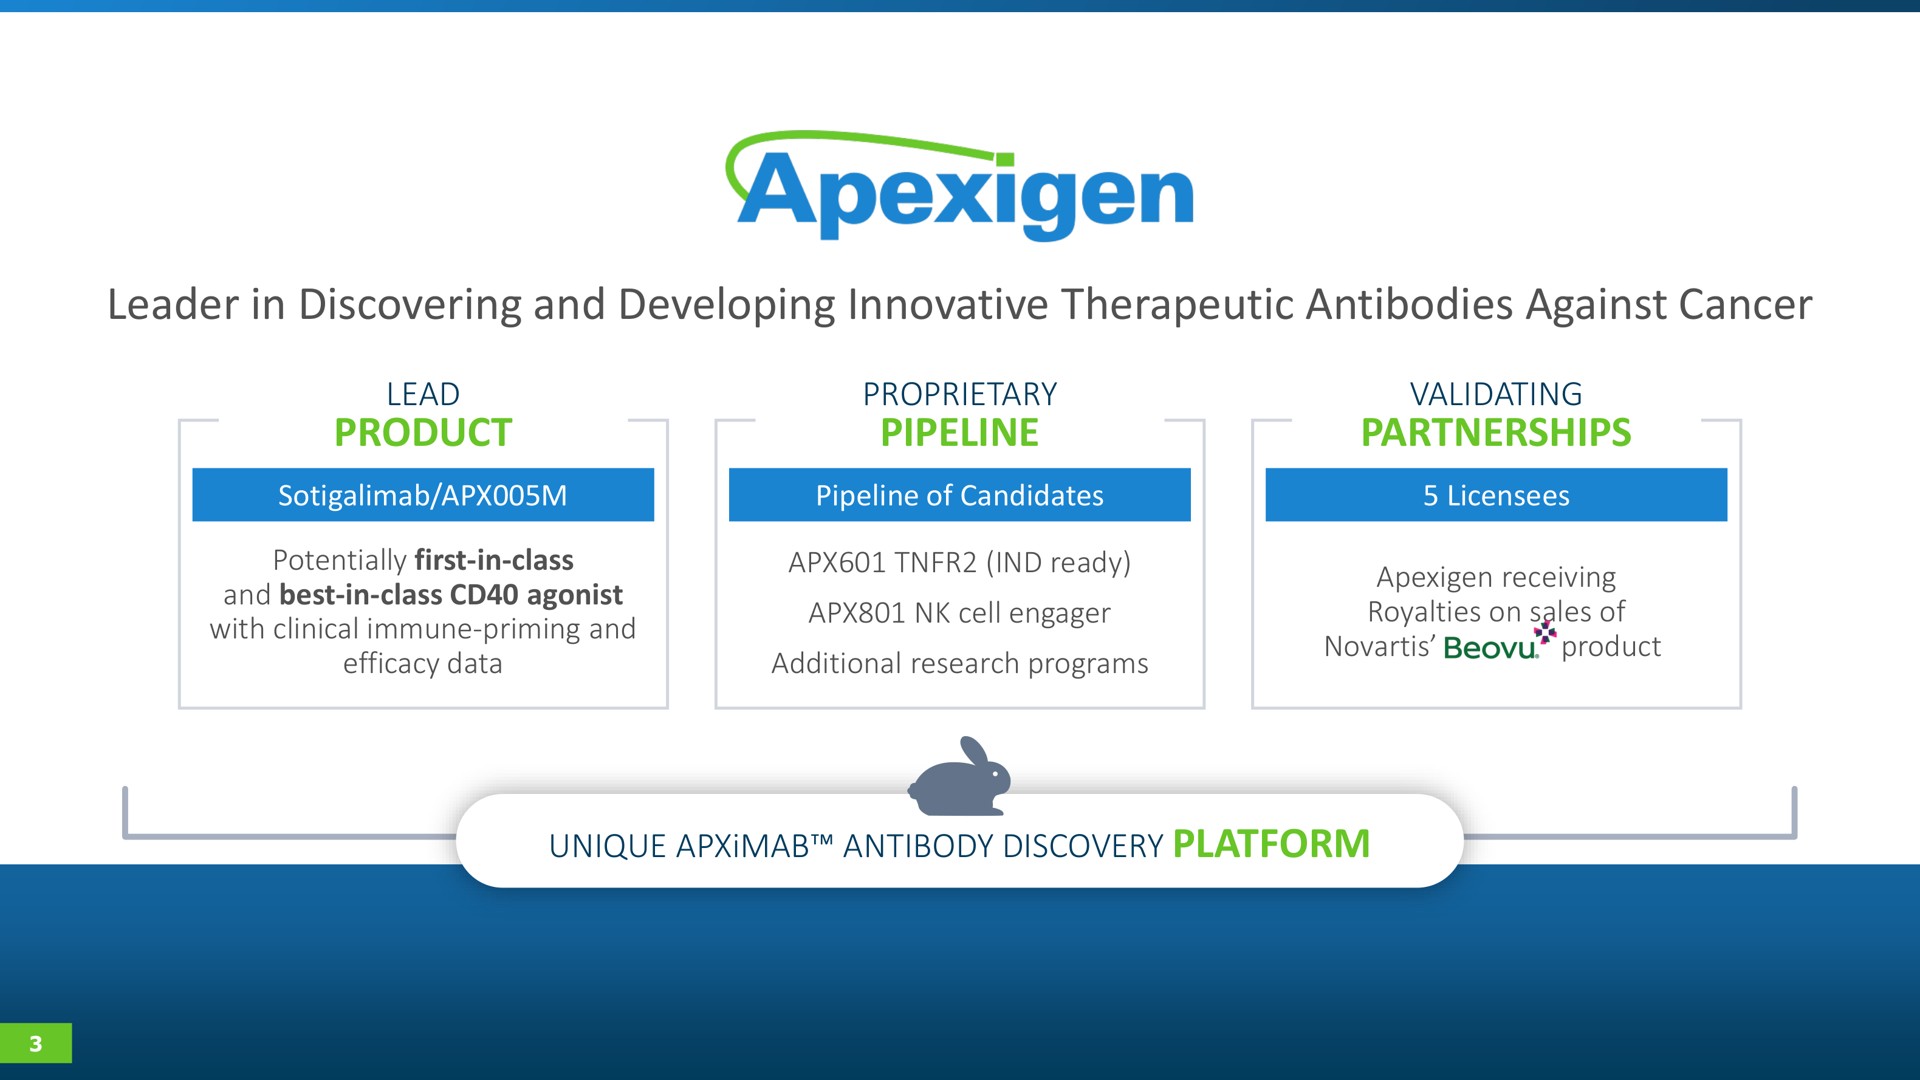 leader in discovering and developing innovative therapeutic antibodies against cancer | Apexigen